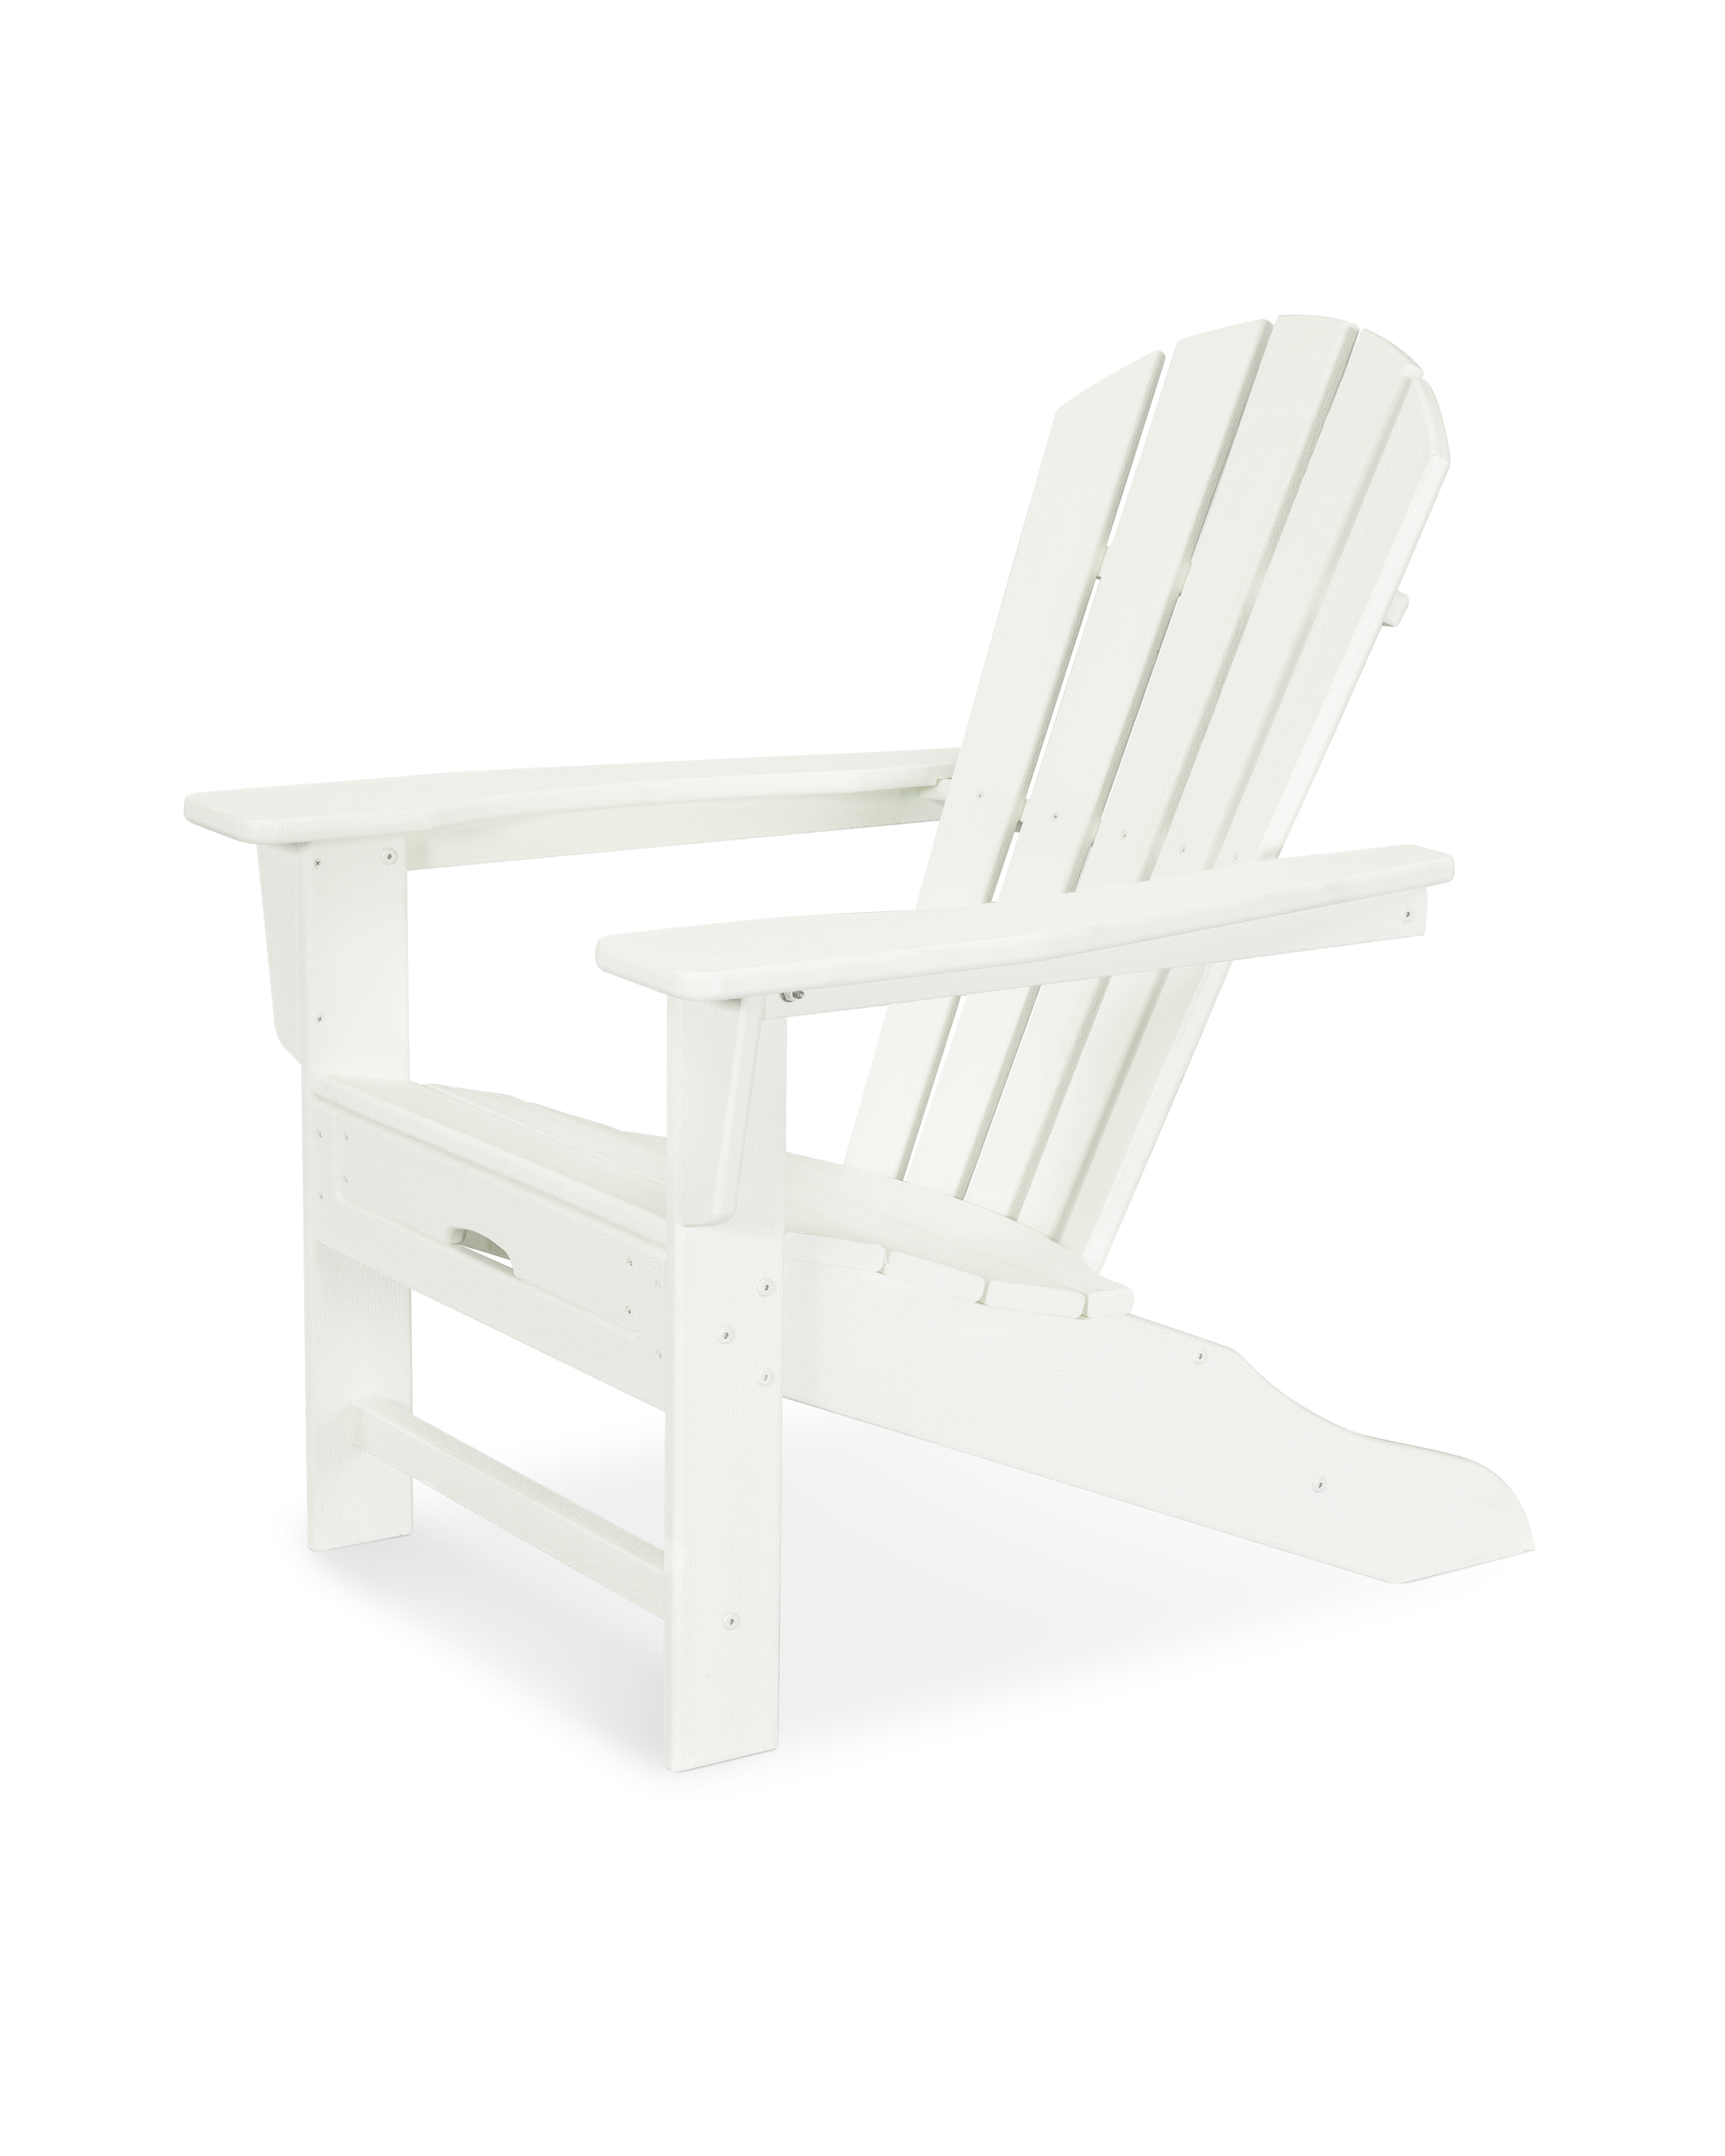 palm coast ultimate adirondack with hideaway ottoman in vintage white thumbnail image